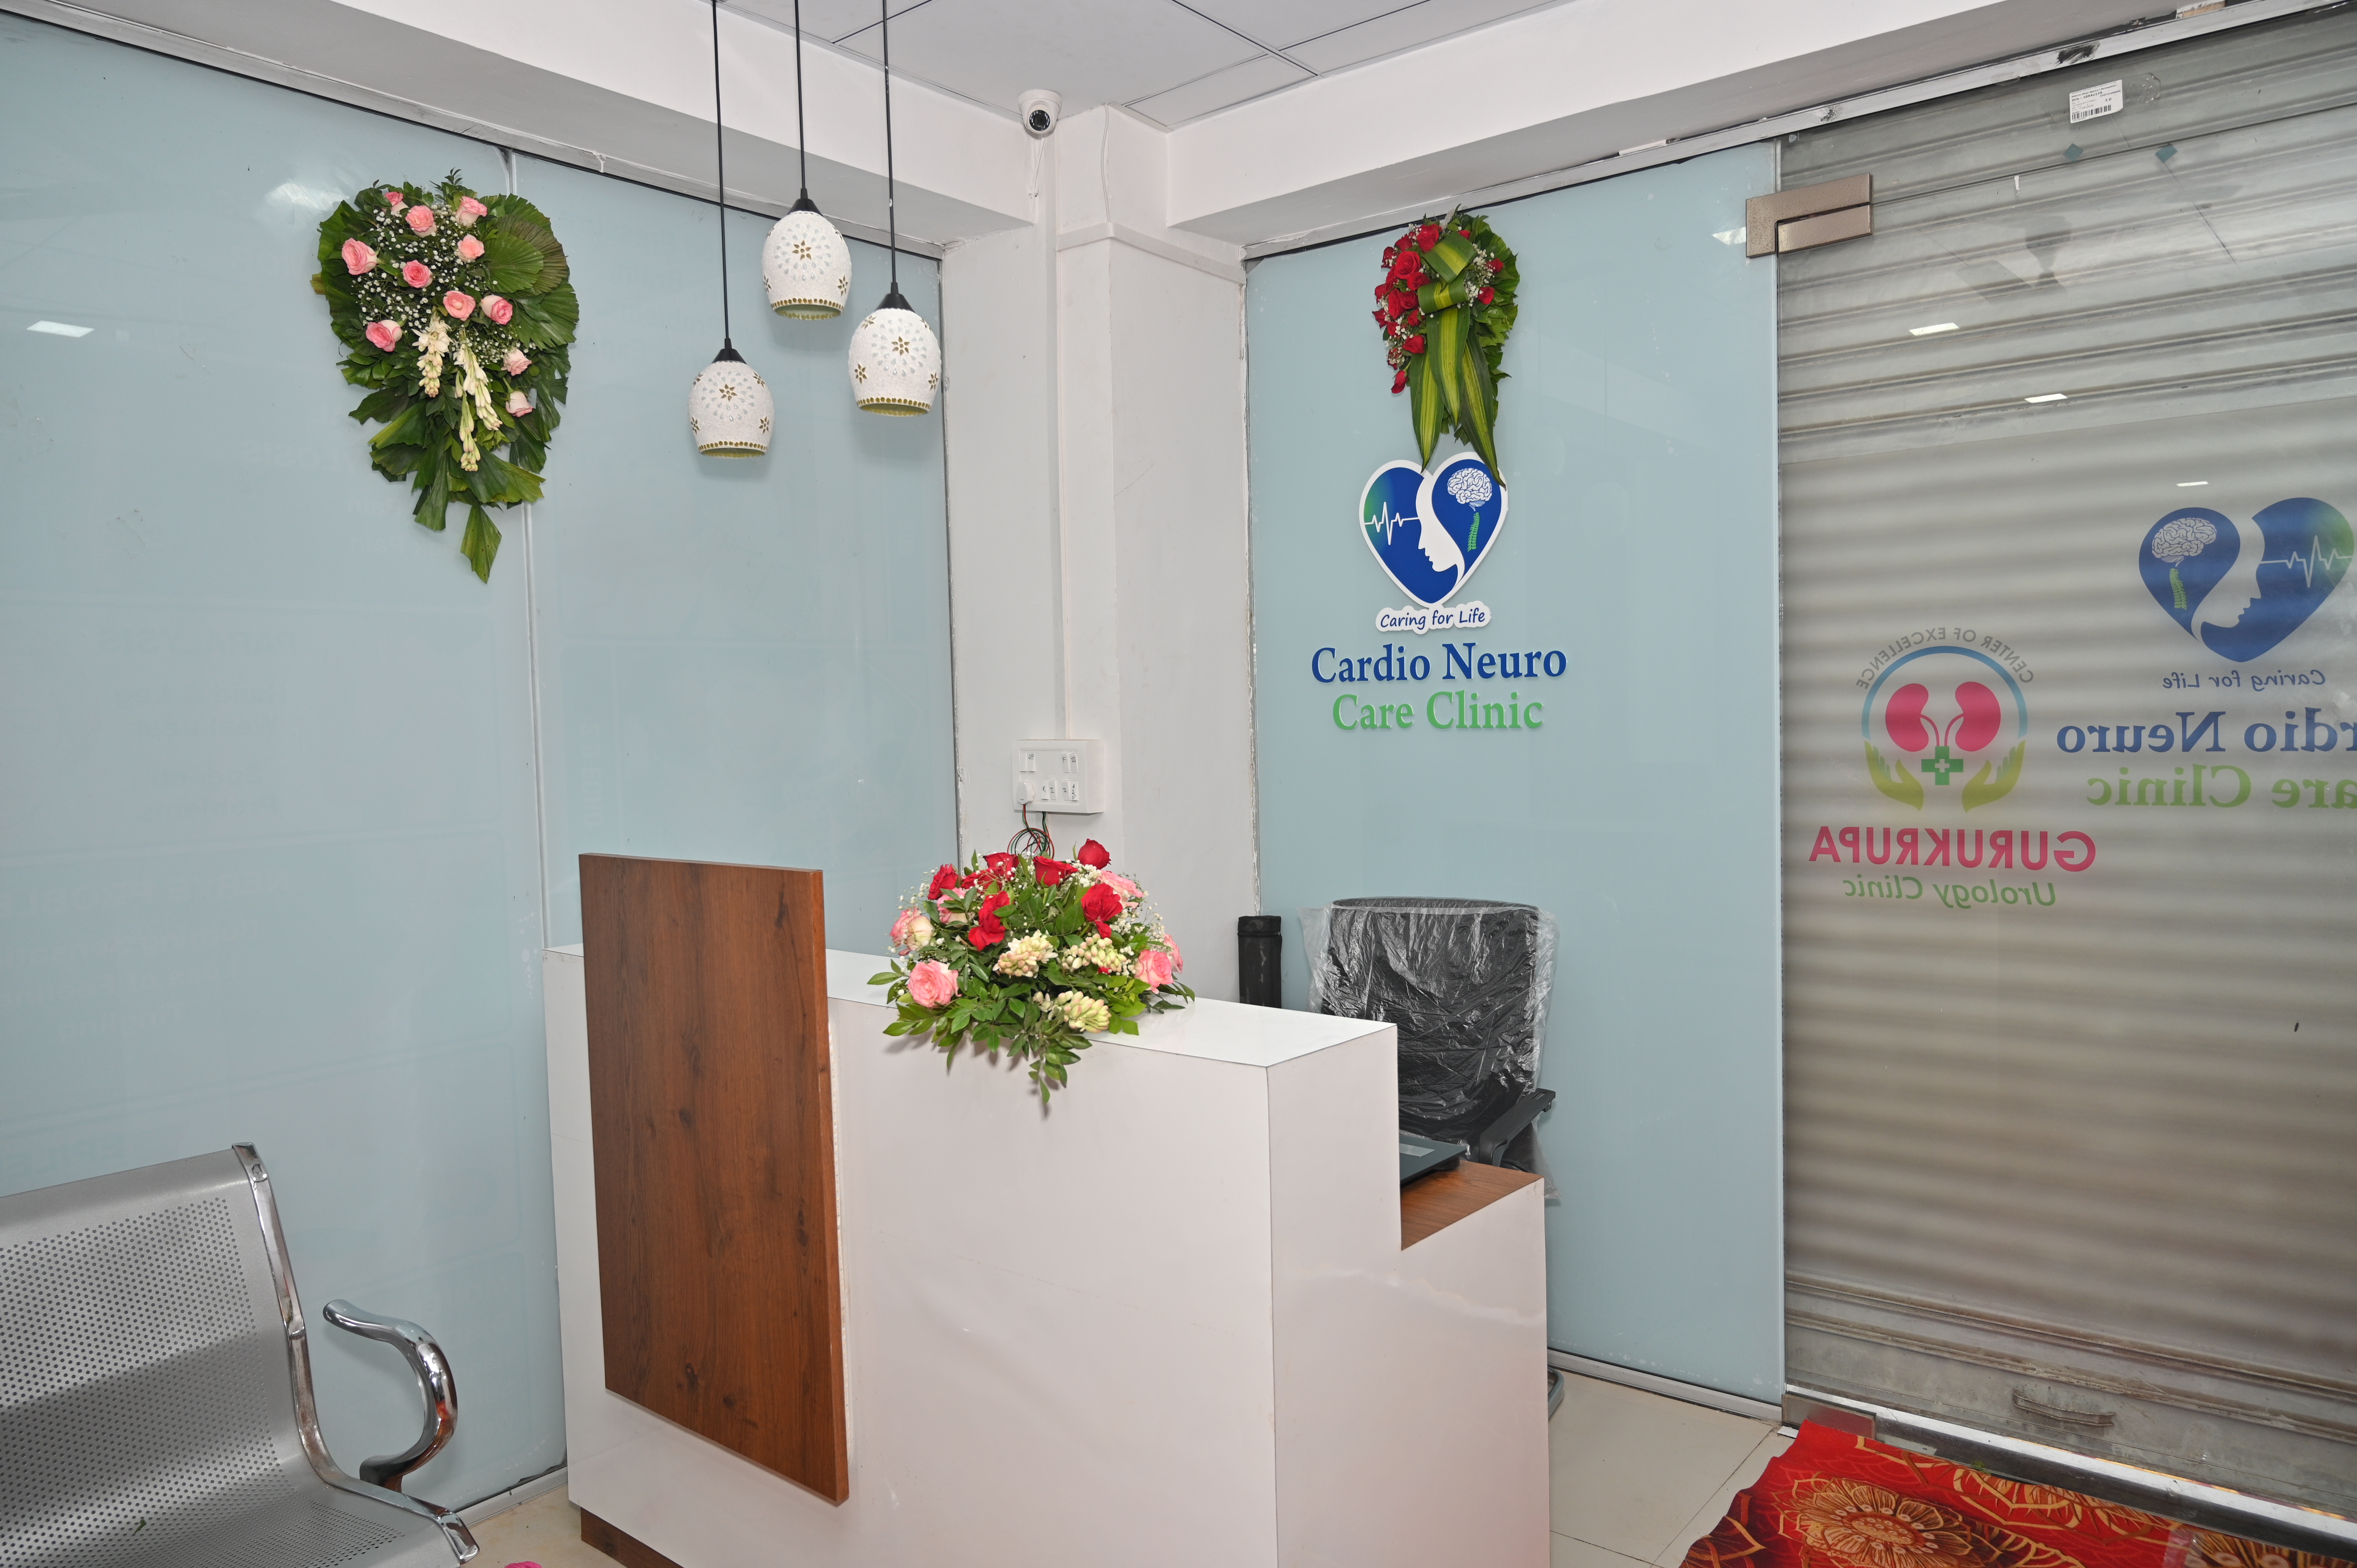 Cardio Neuro Care Clinic about